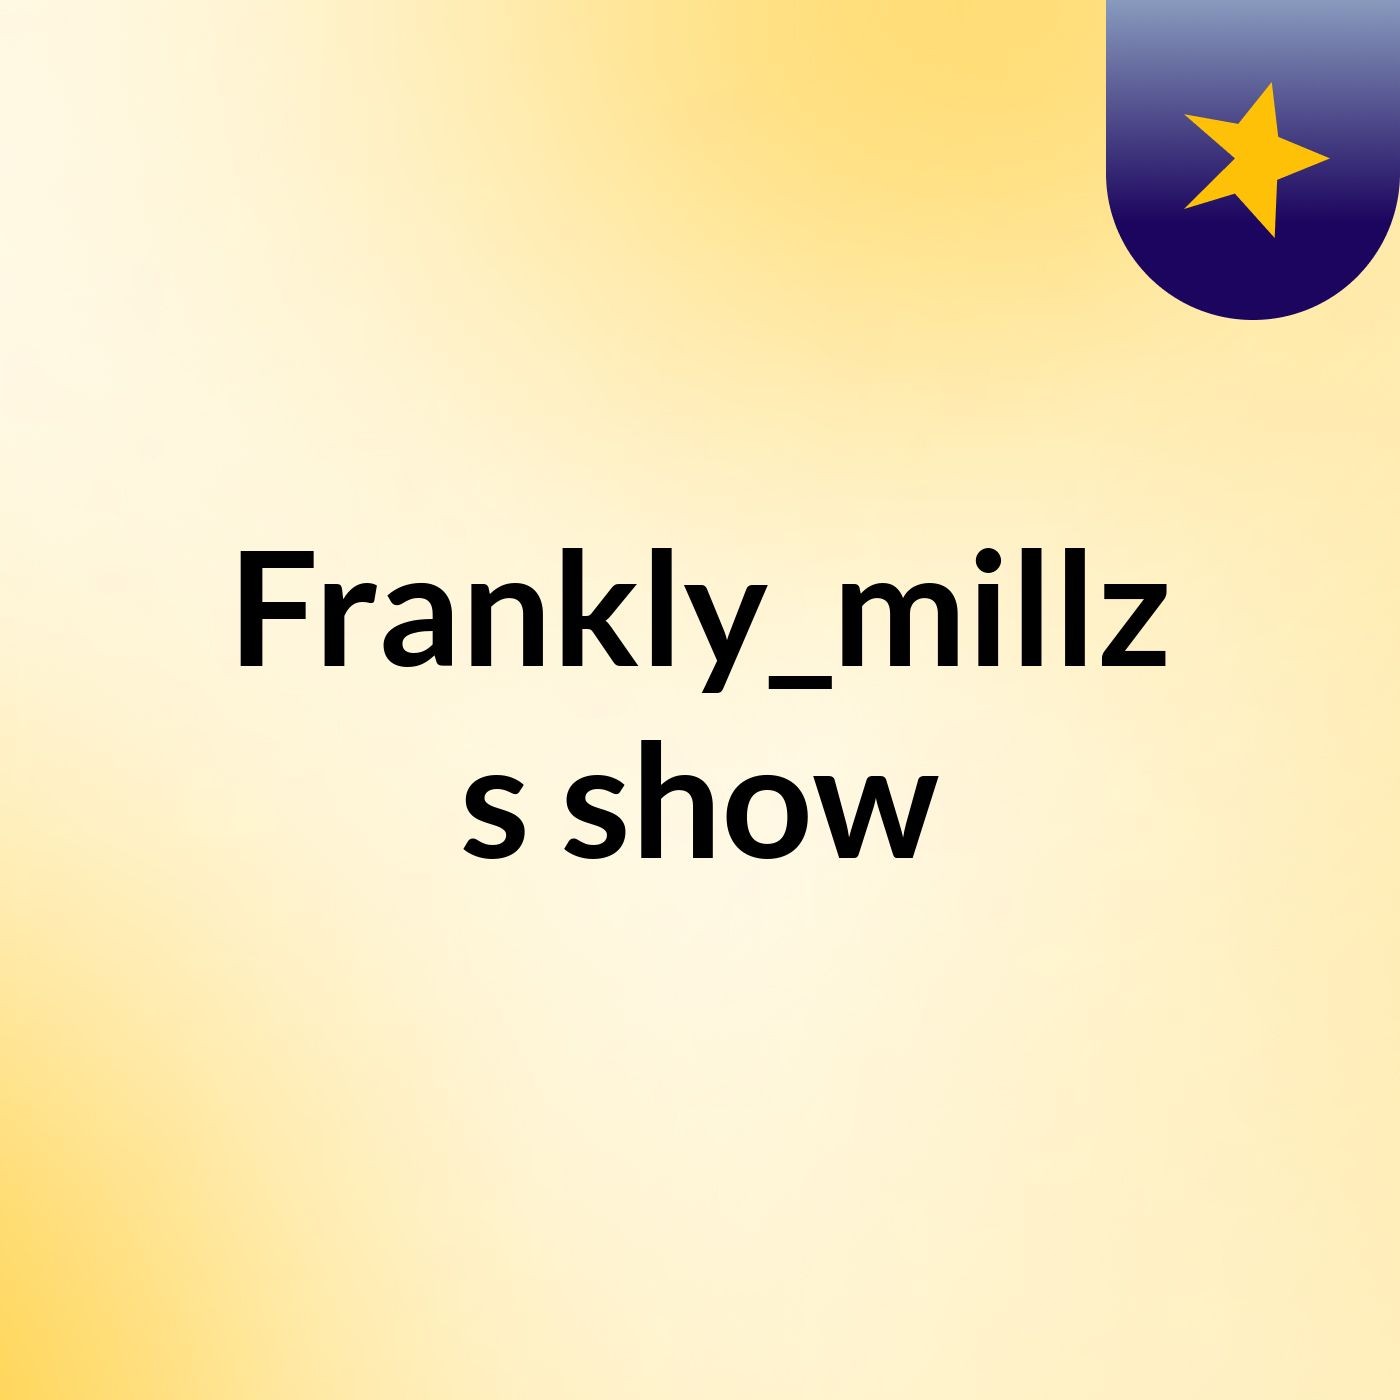 Frankly_millz's show